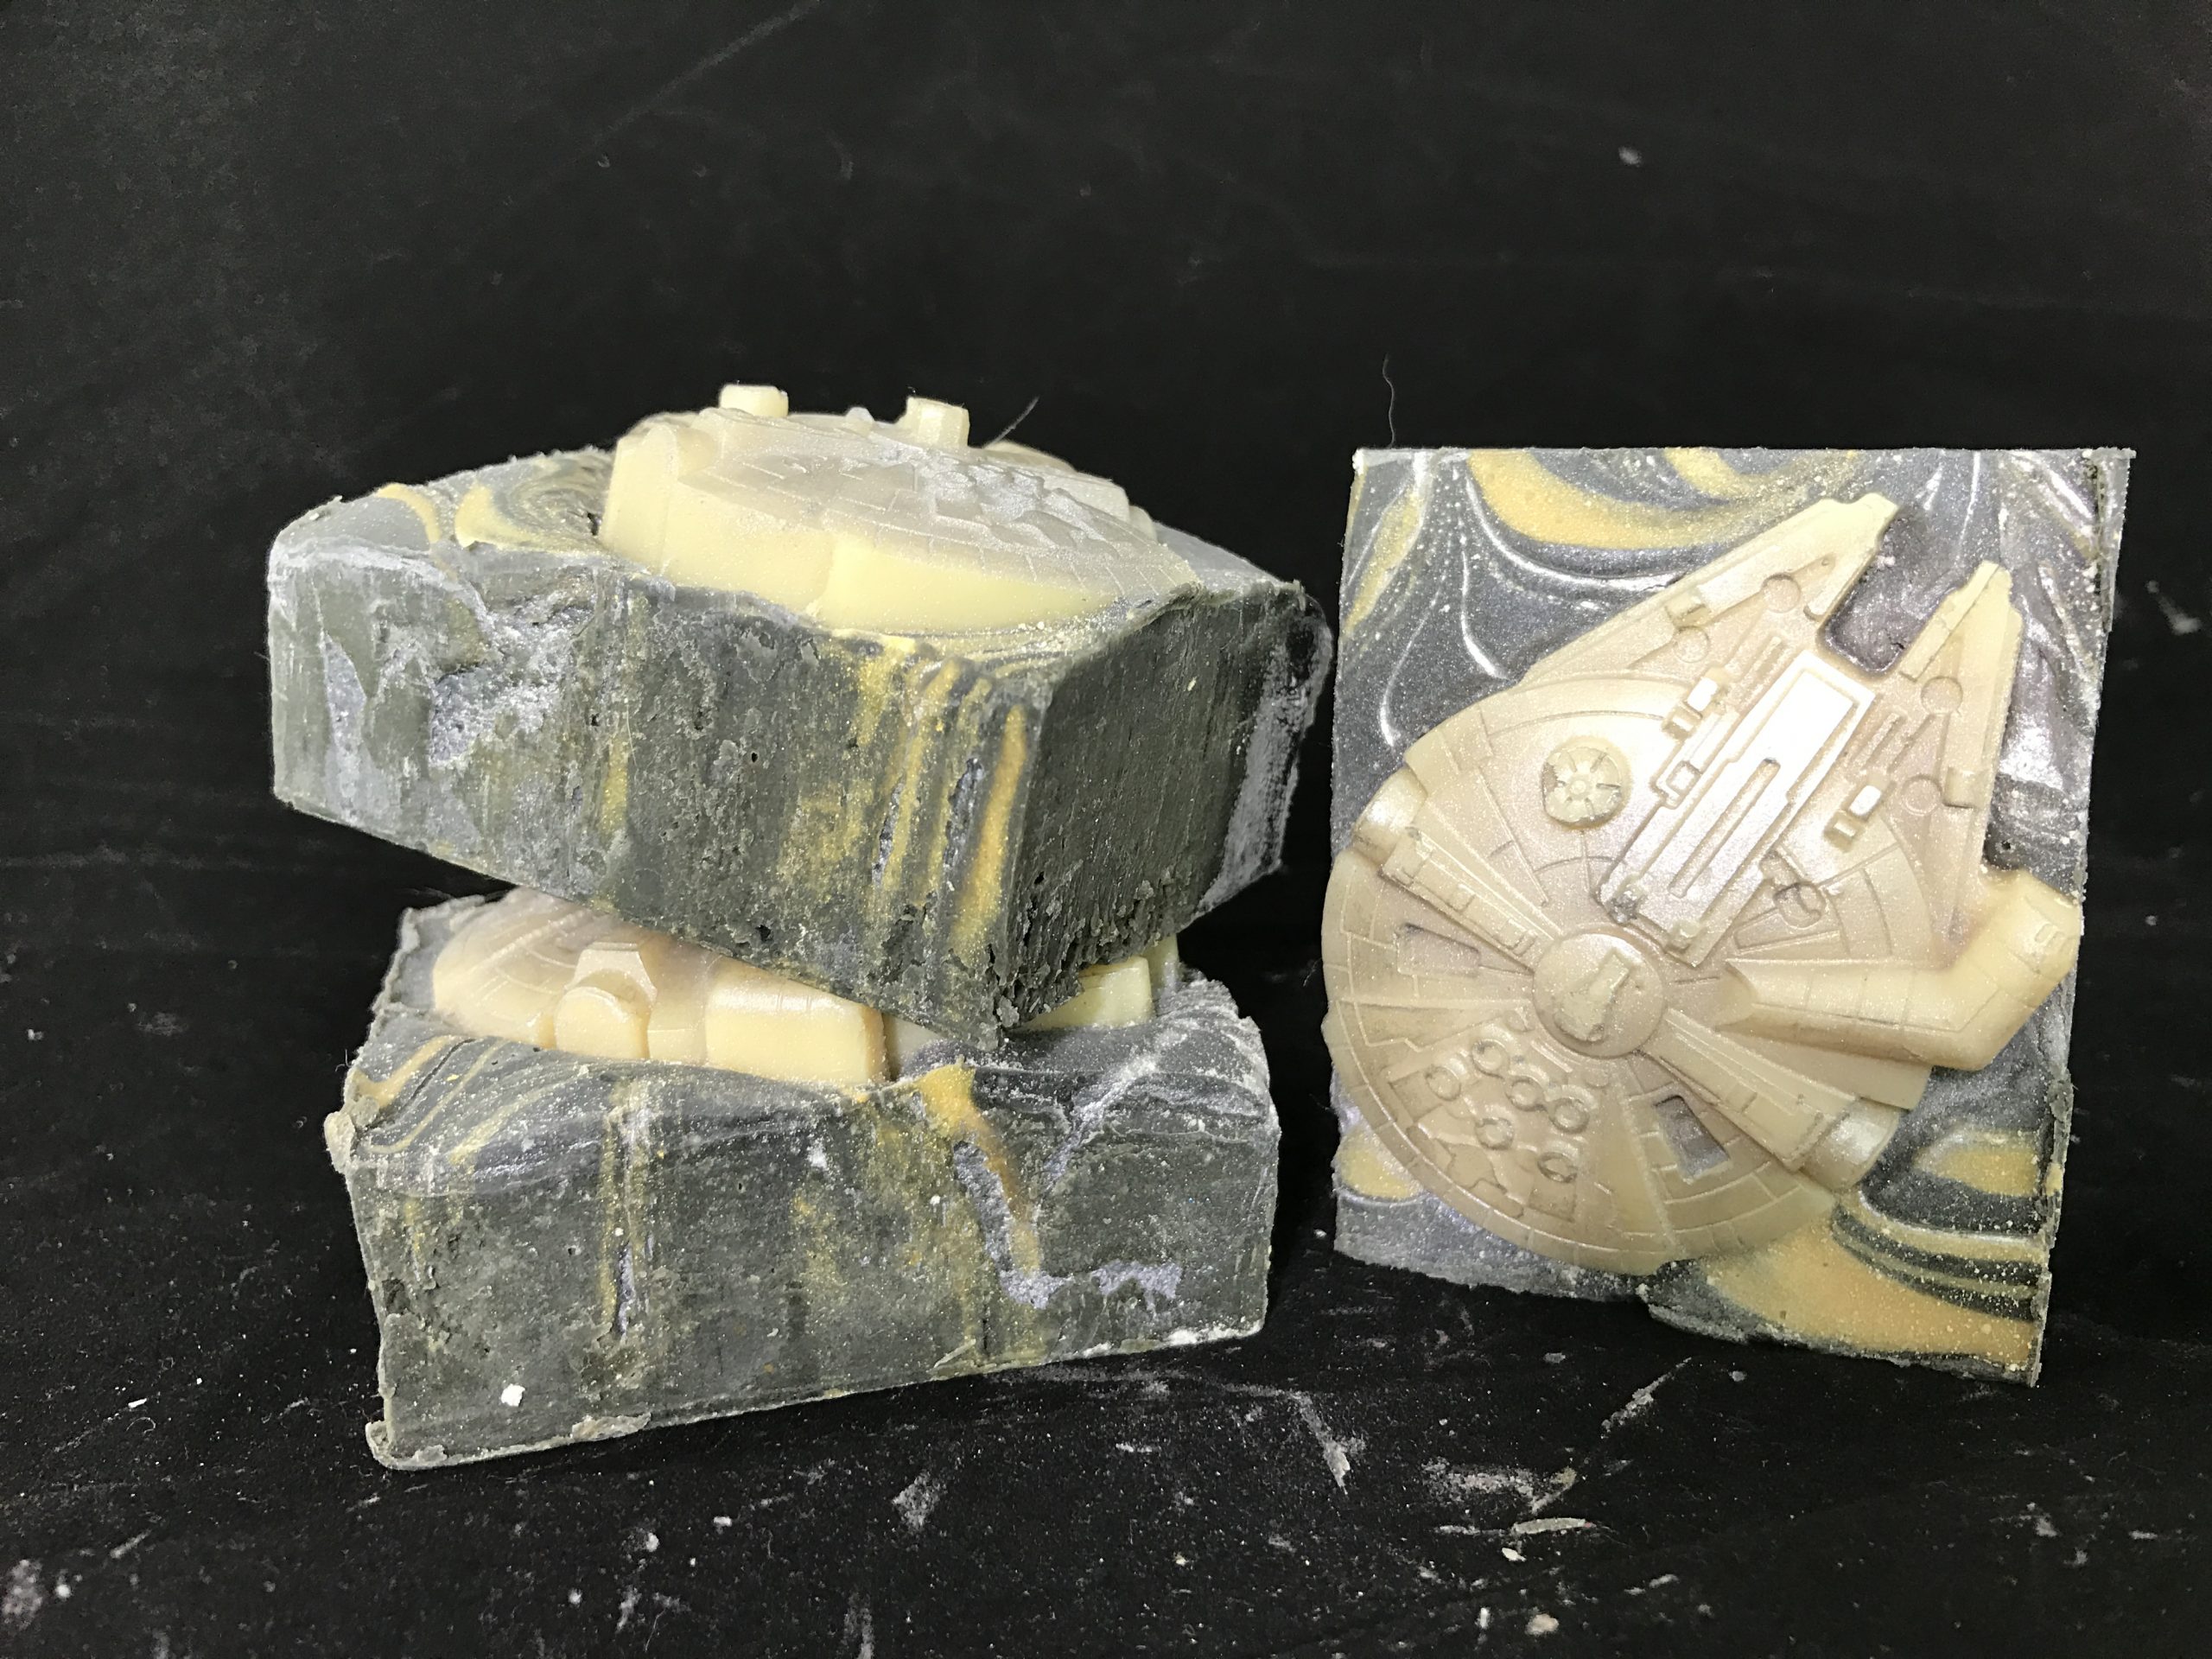 Handmade soap with Millennium Falcon on it